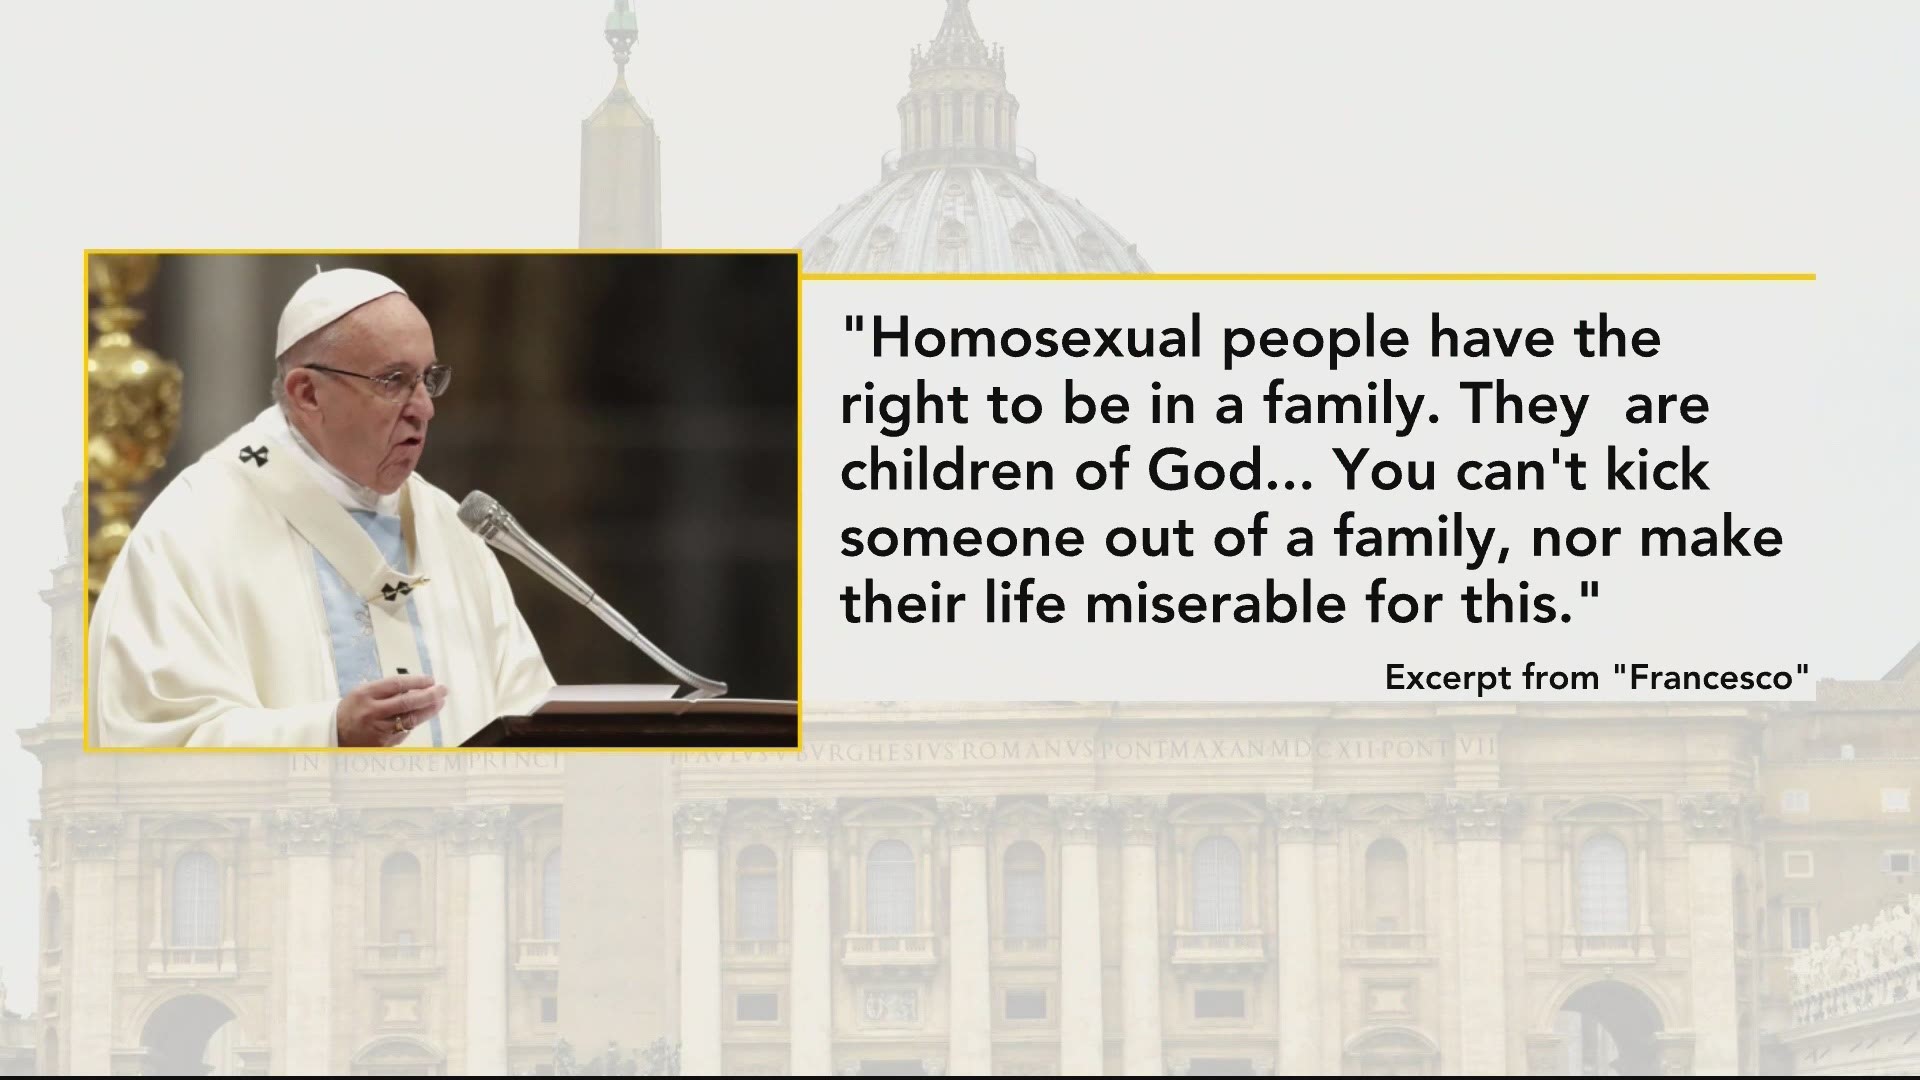 'Homosexual people have the right to be in a family. They are children of God,' Pope Francis said in one of his sit-down interviews for the film.